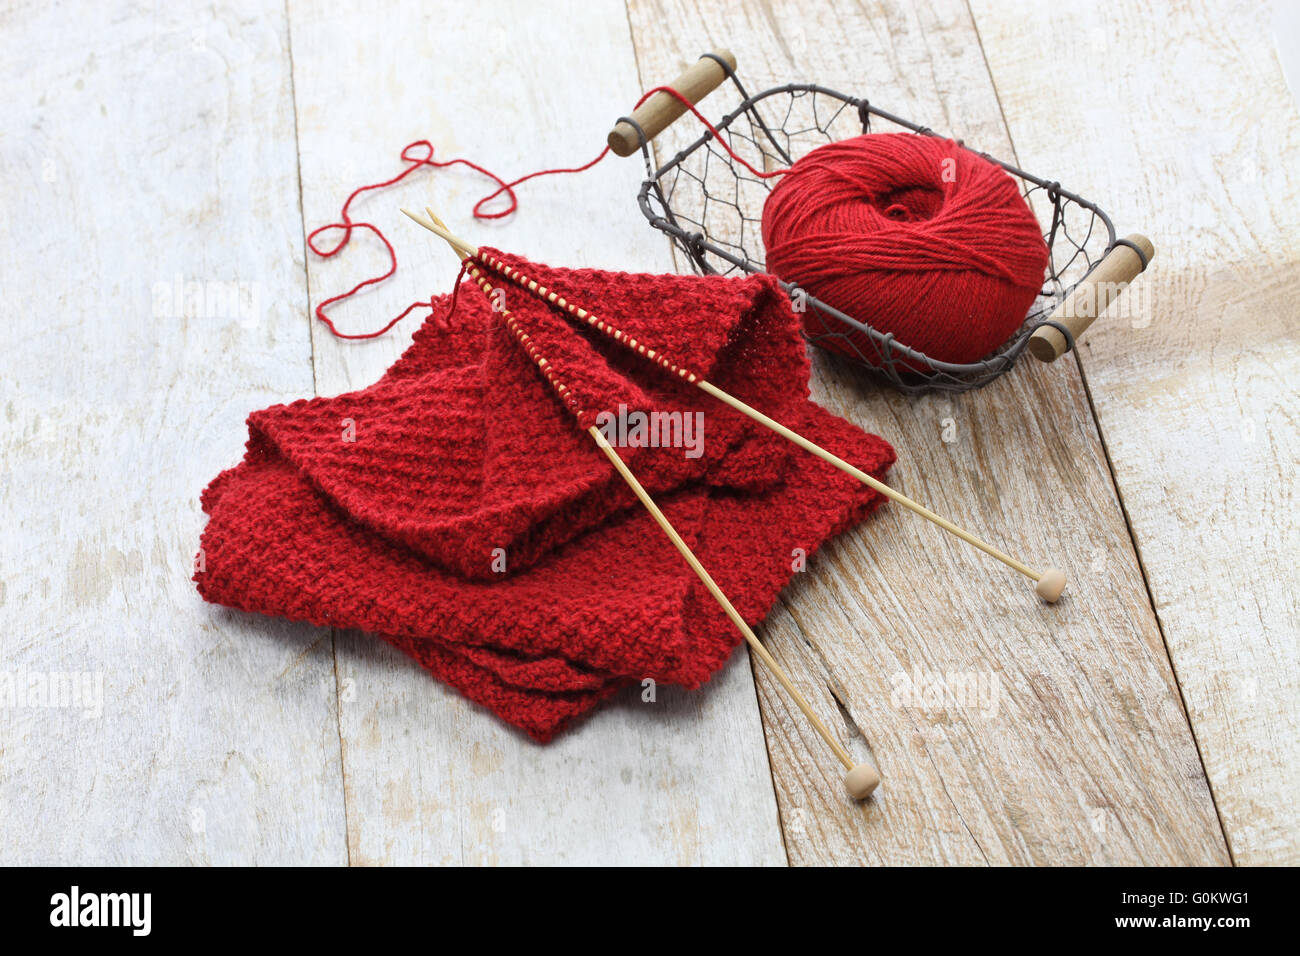 hand knitted red scarf, yarn ball and knitting needles, handmade christmas present Stock Photo